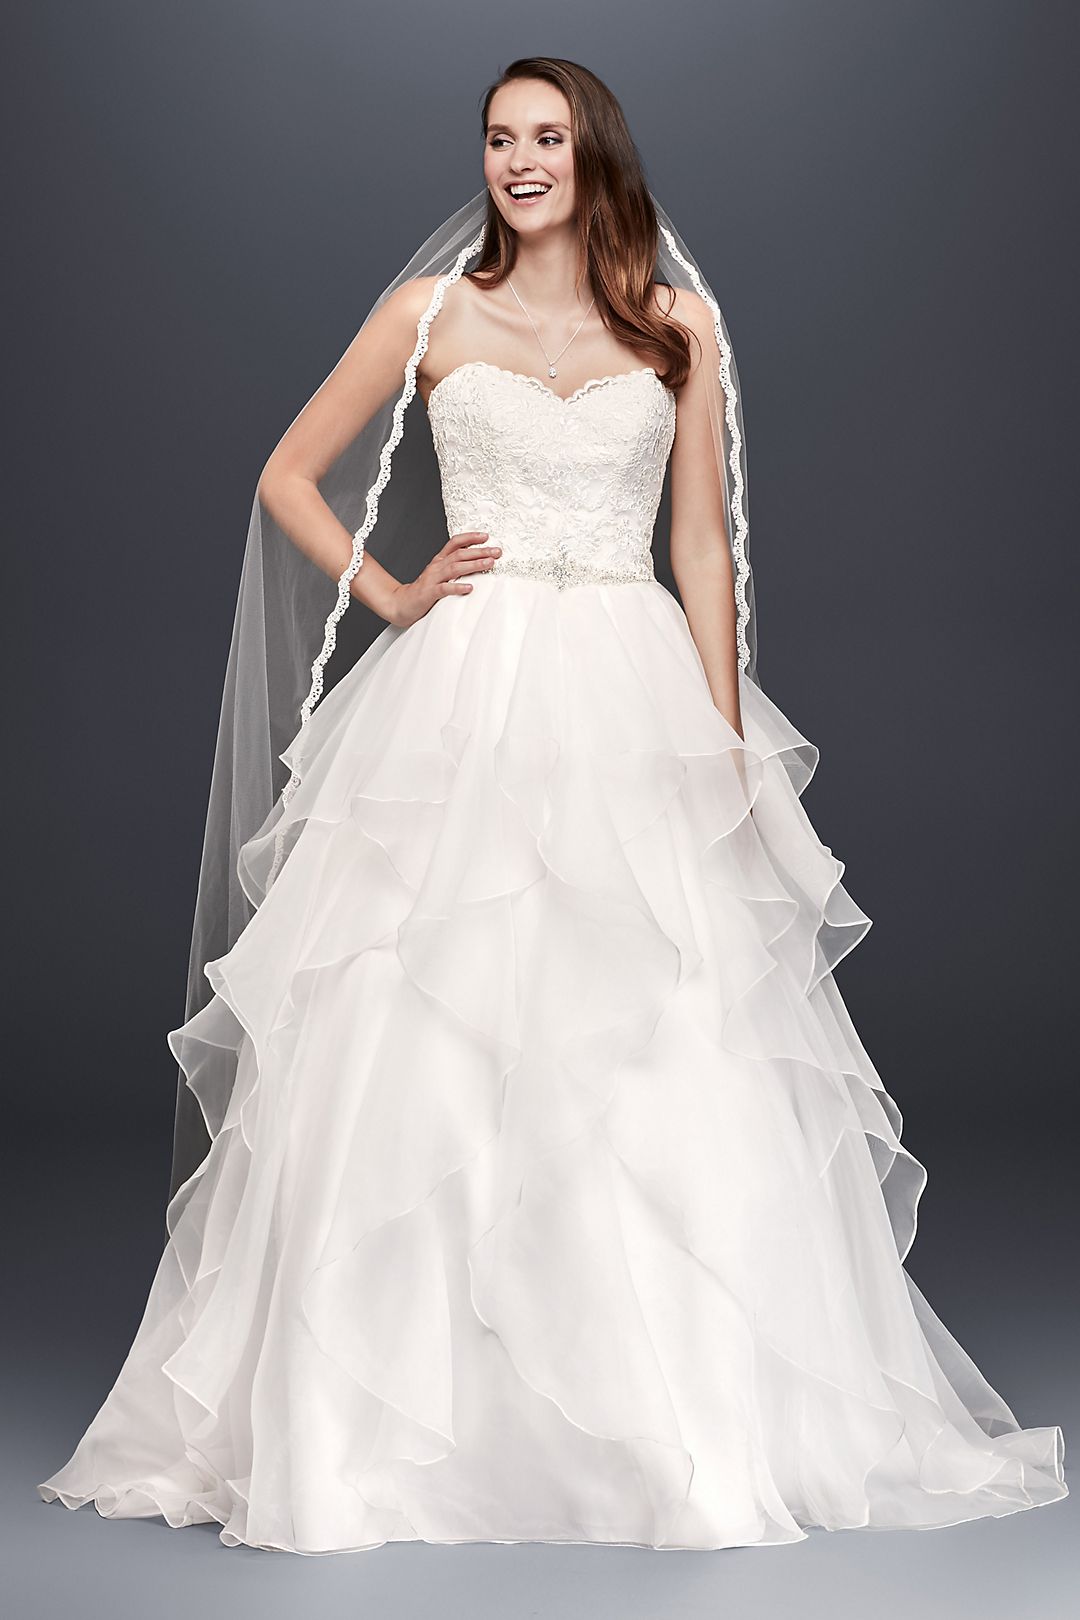 As-Is Lace and Organza Petite Wedding Ball Gown Image 1